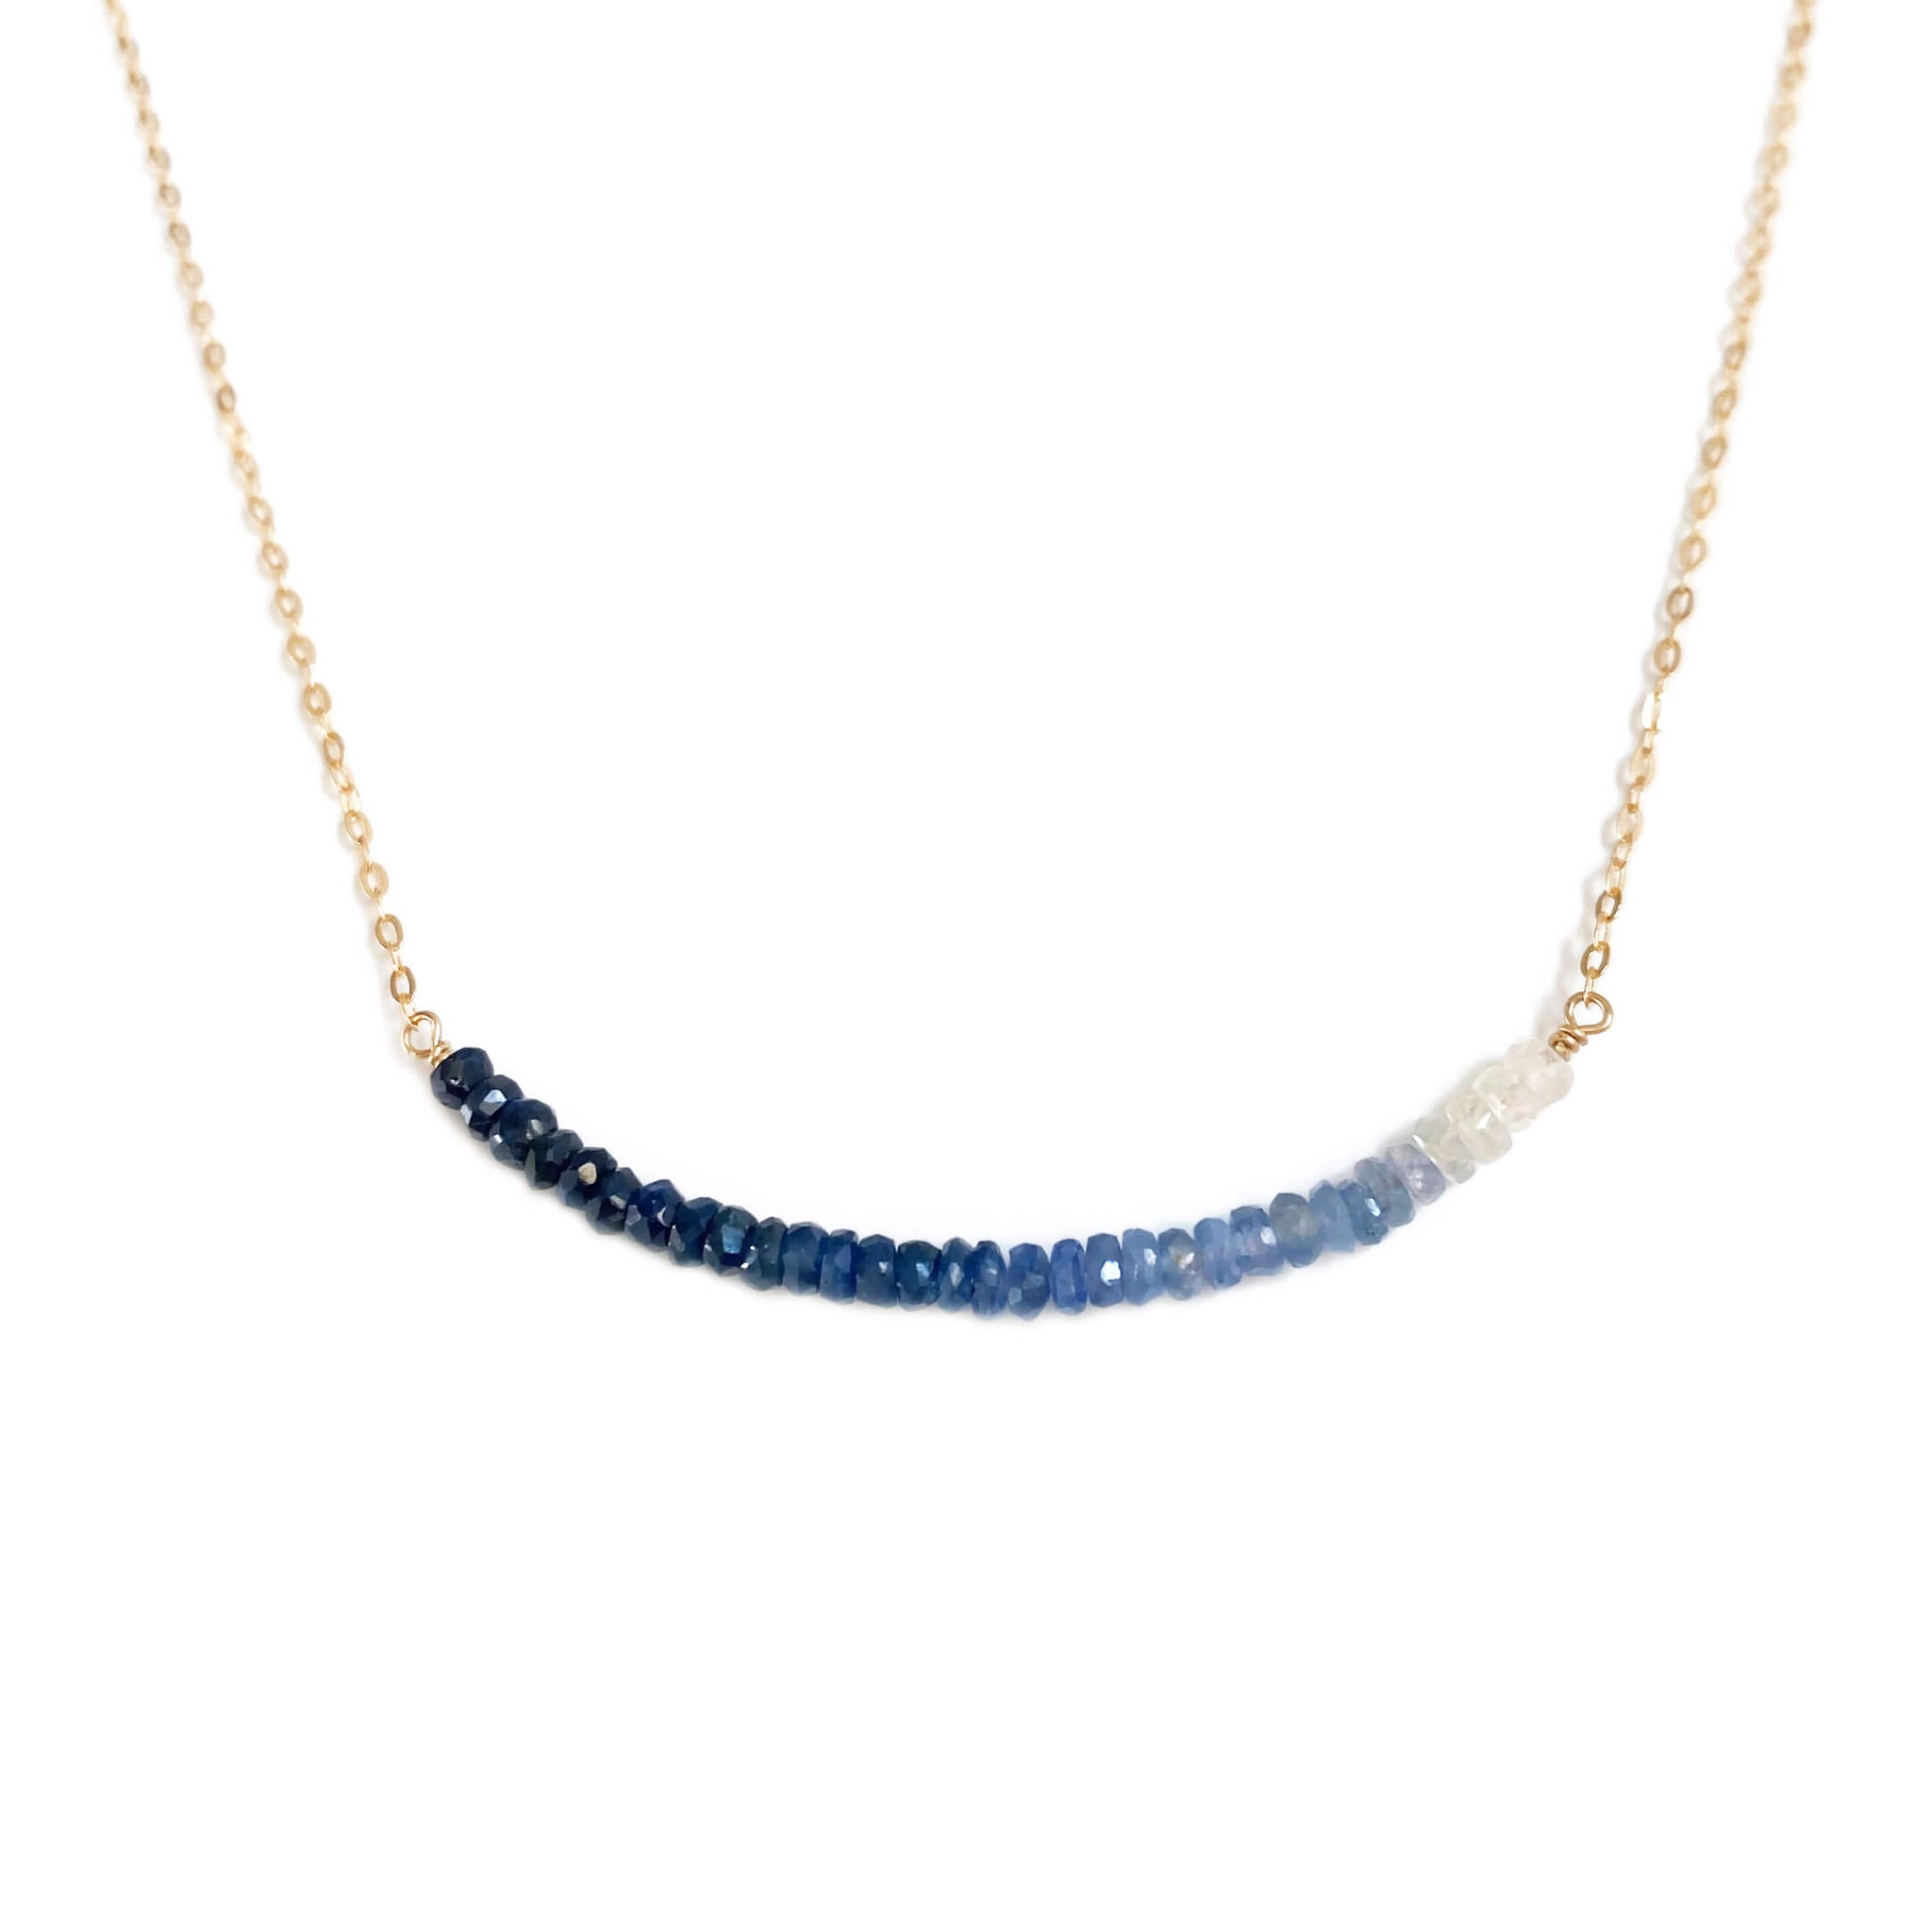 This dainty sapphire necklace is adjustable and can be made in gold fill, sterling silver and 14k gold material.